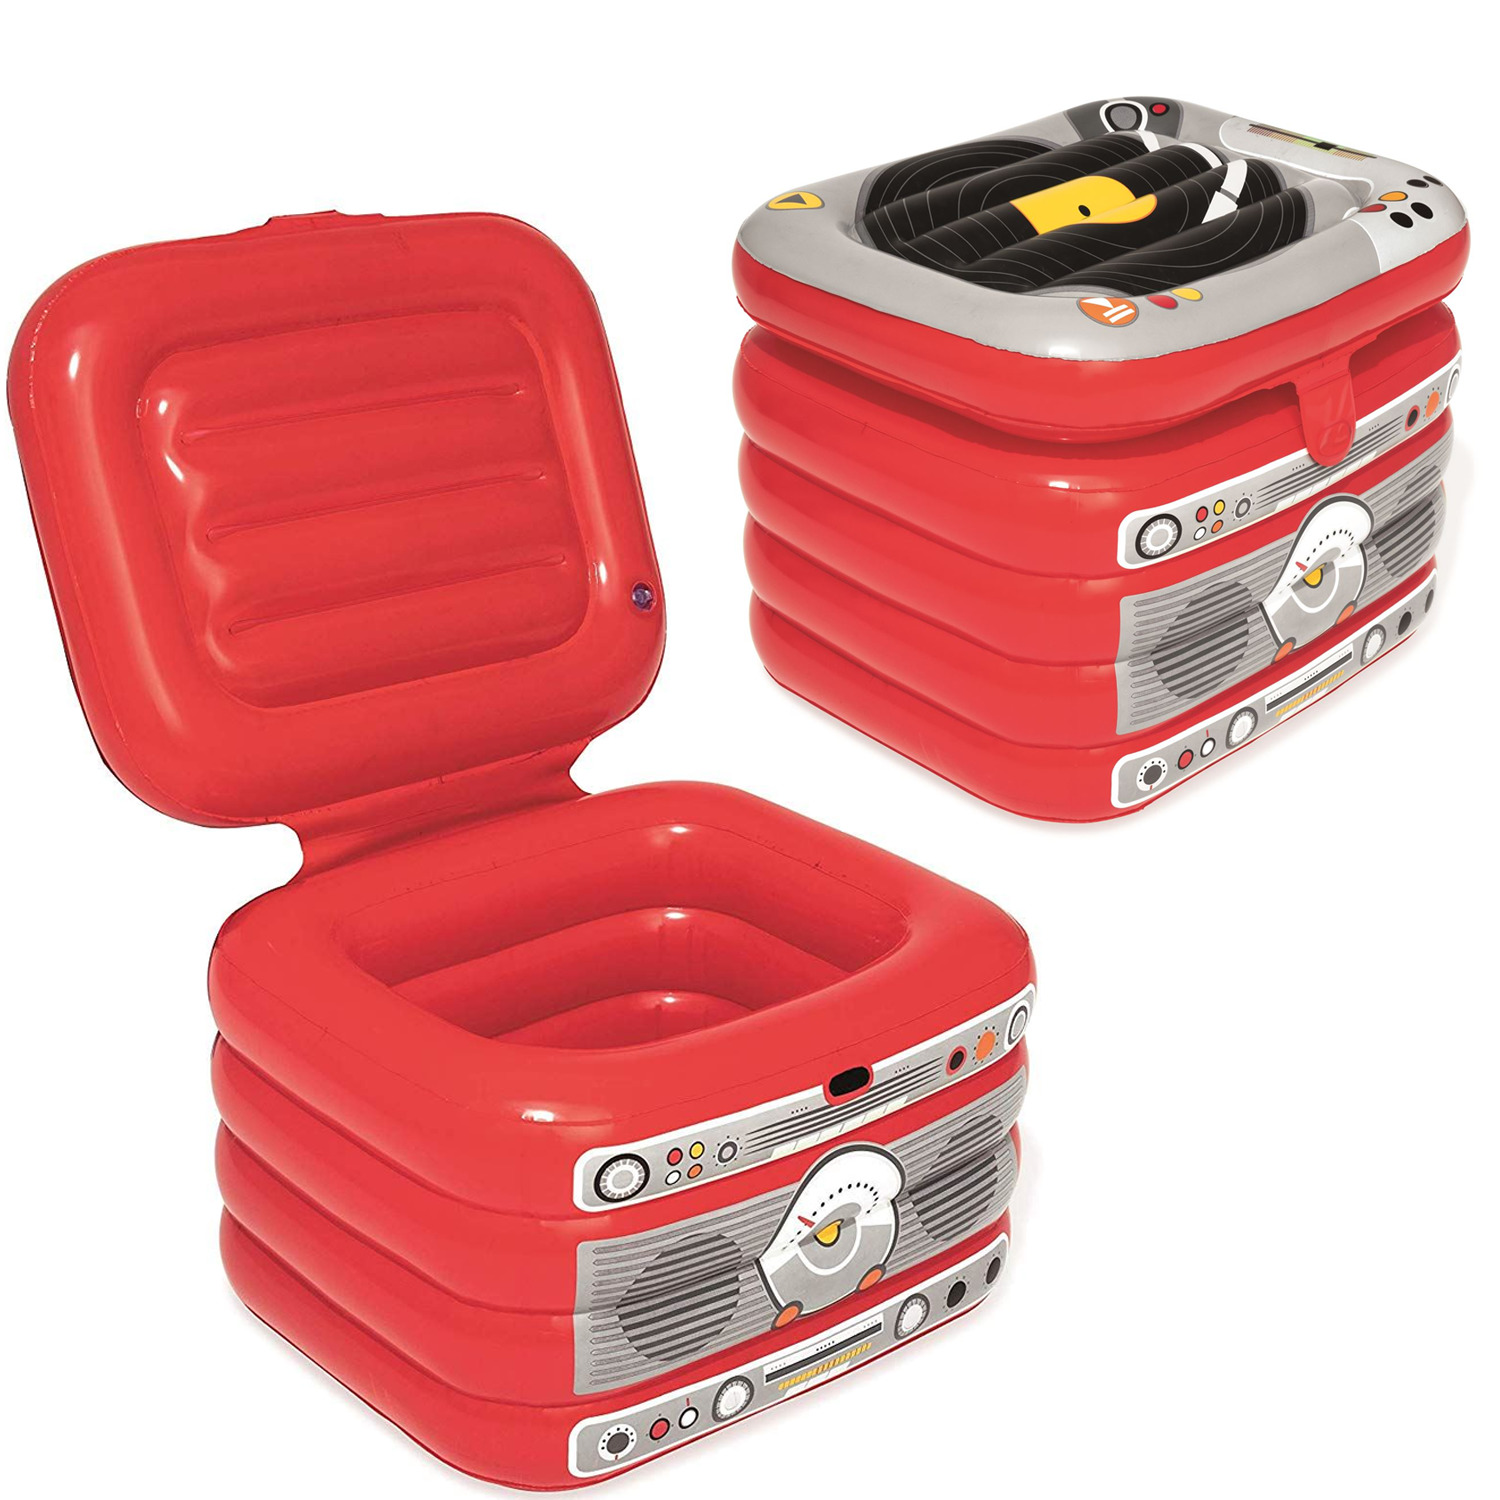 PACK OF 2 Inflatable Party Turntable Cooler Jukebox Beverage Storage Box Beach Pool Float Accessory - Red